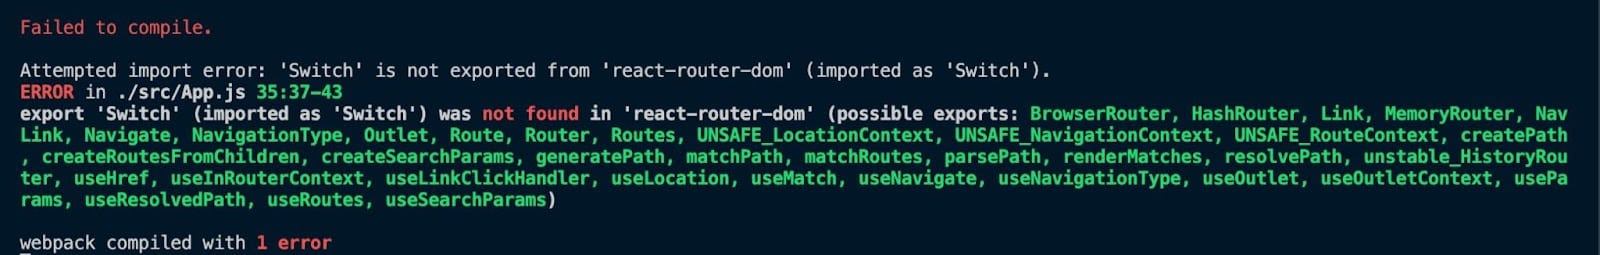 Mensaje de error Switch 'is not exported from 'react-router-dom